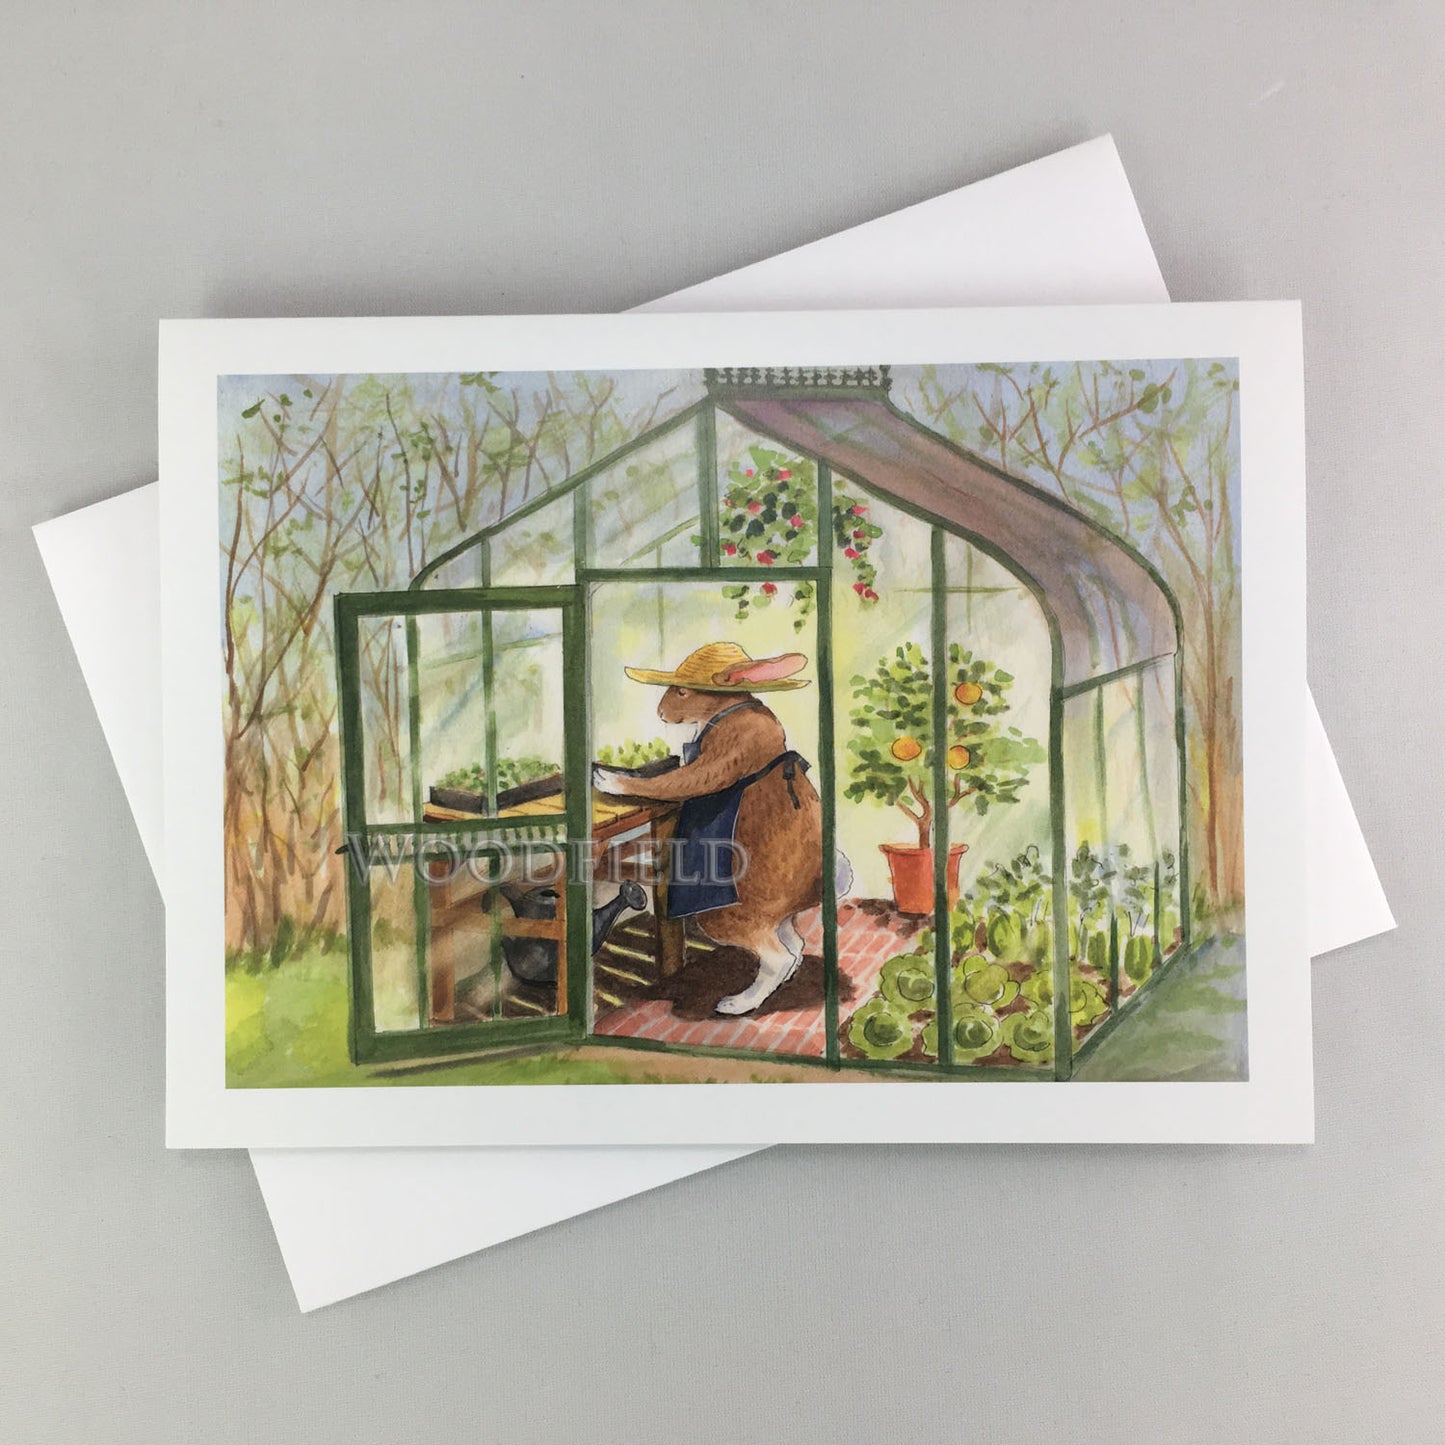 Green House Rabbit - Greeting Card by Woodfield Press